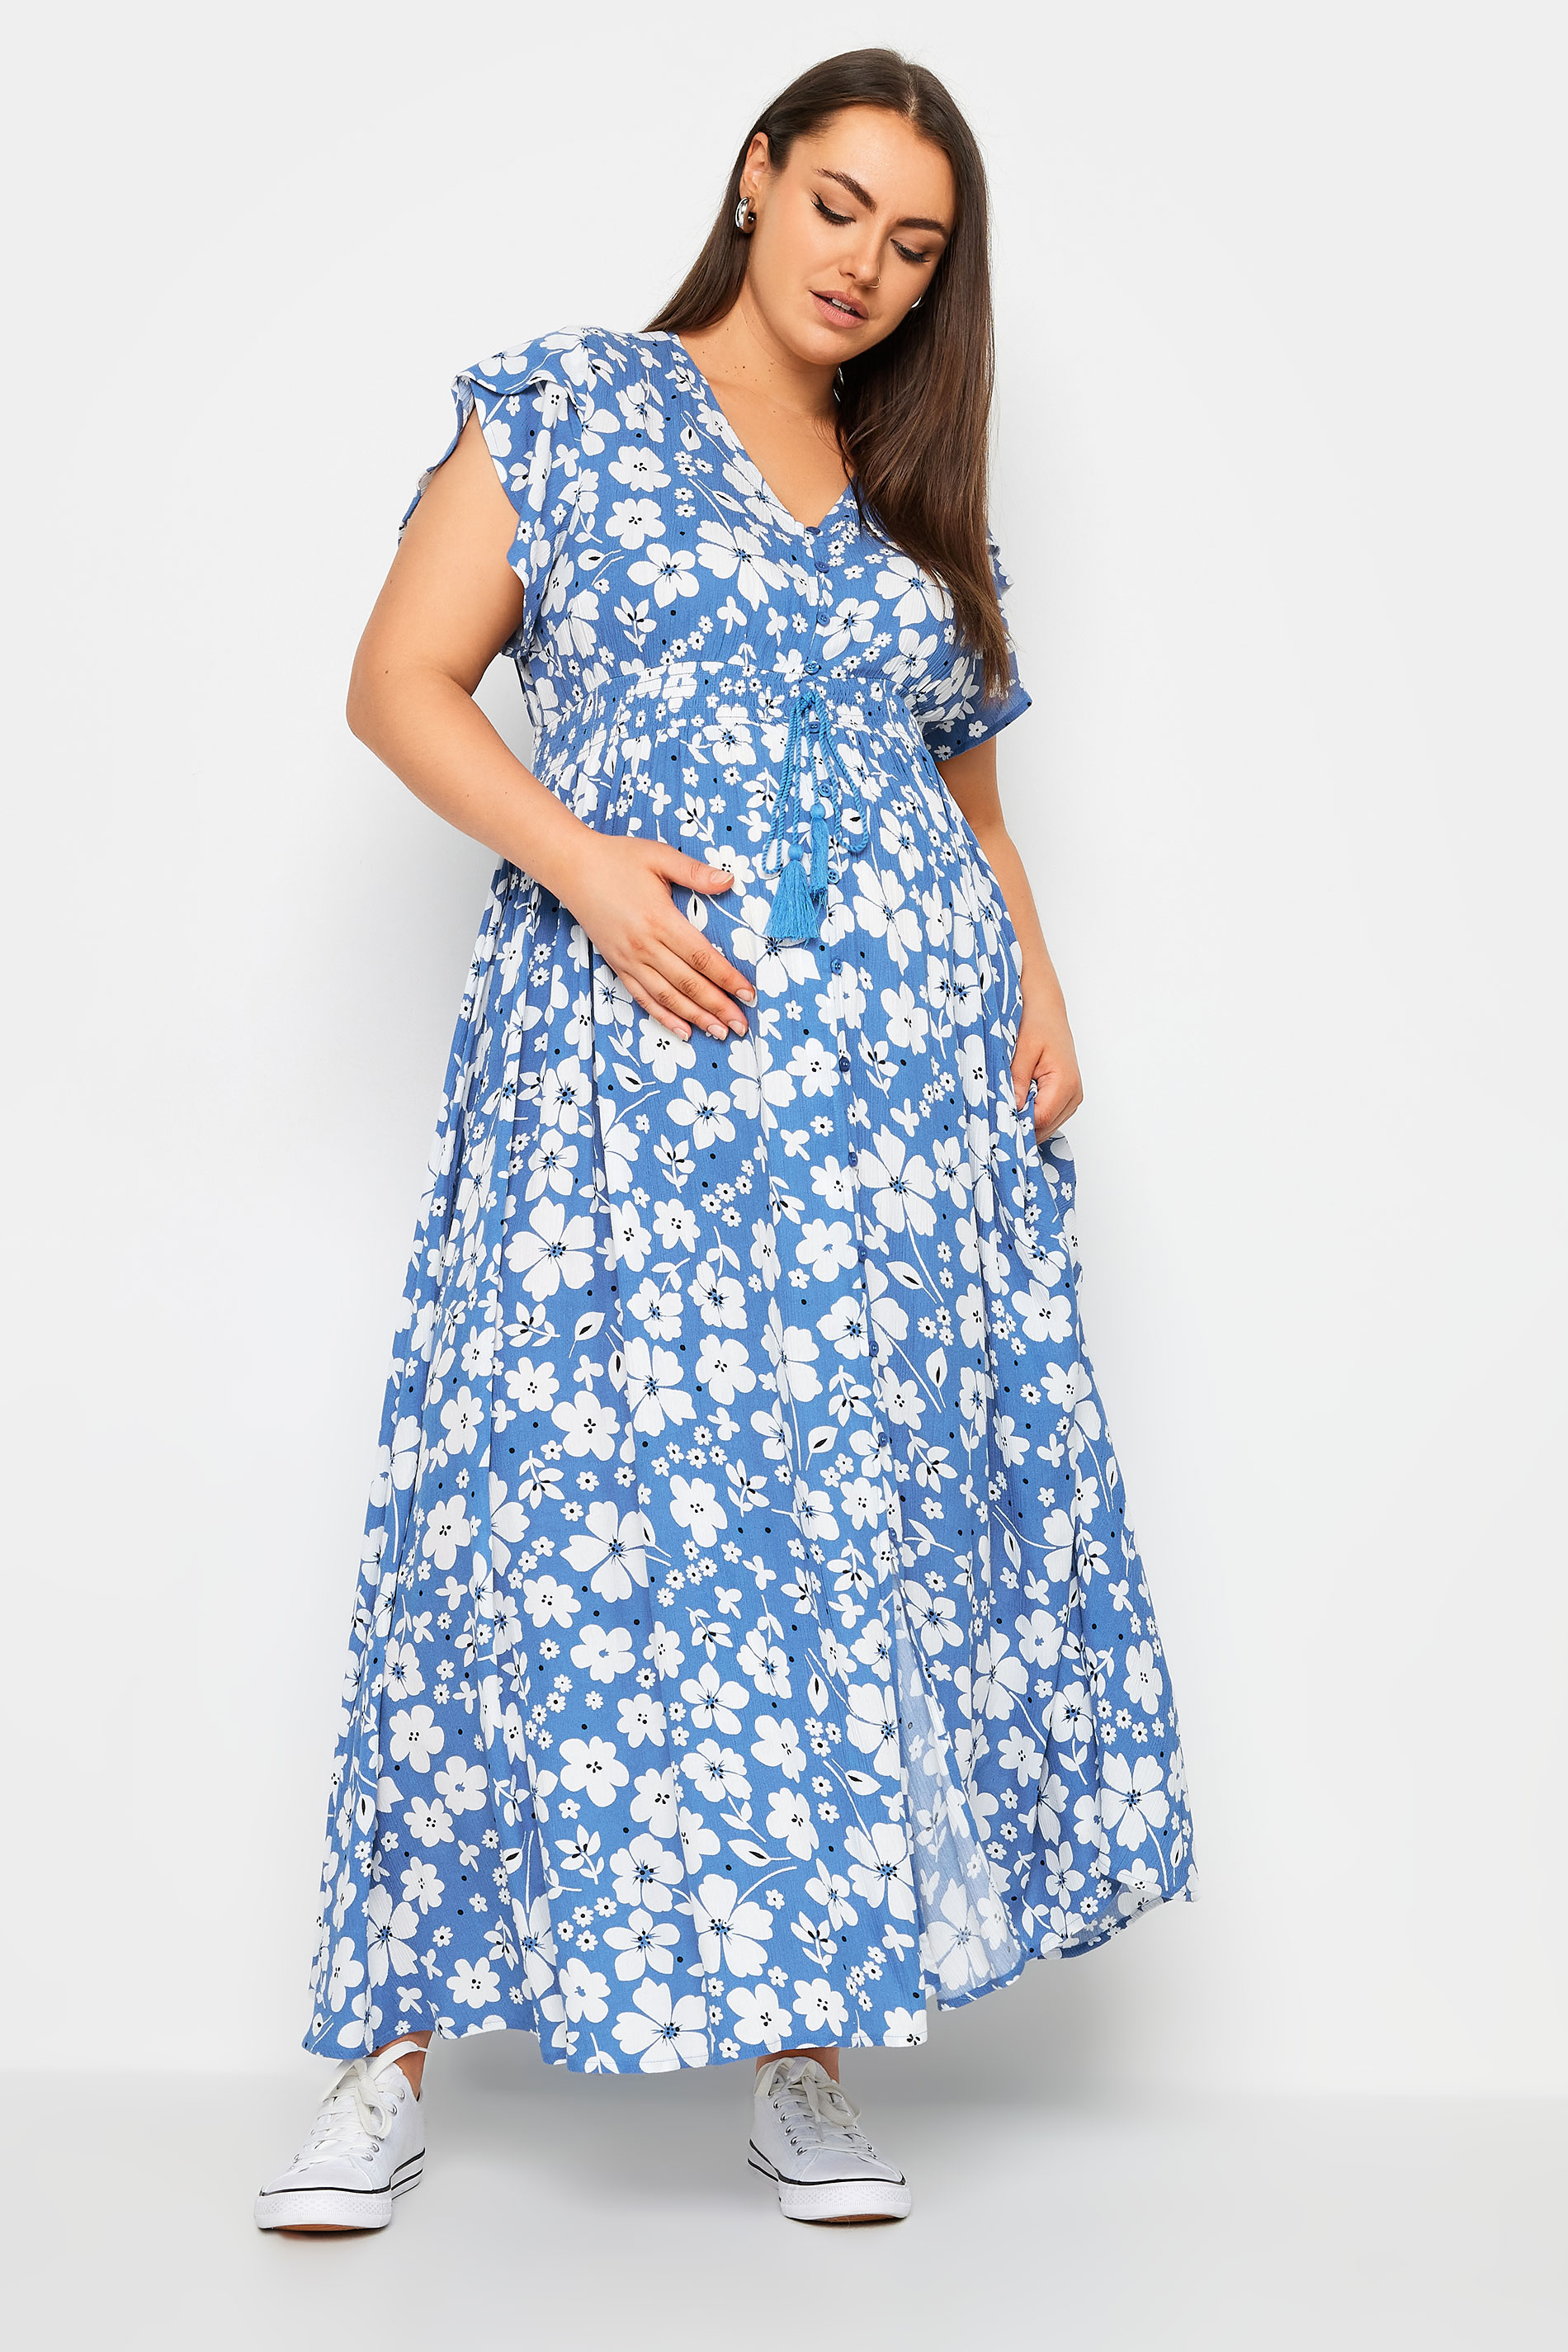 BUMP IT UP MATERNITY Plus Size Blue Floral Print Maxi Dress | Yours Clothing 2